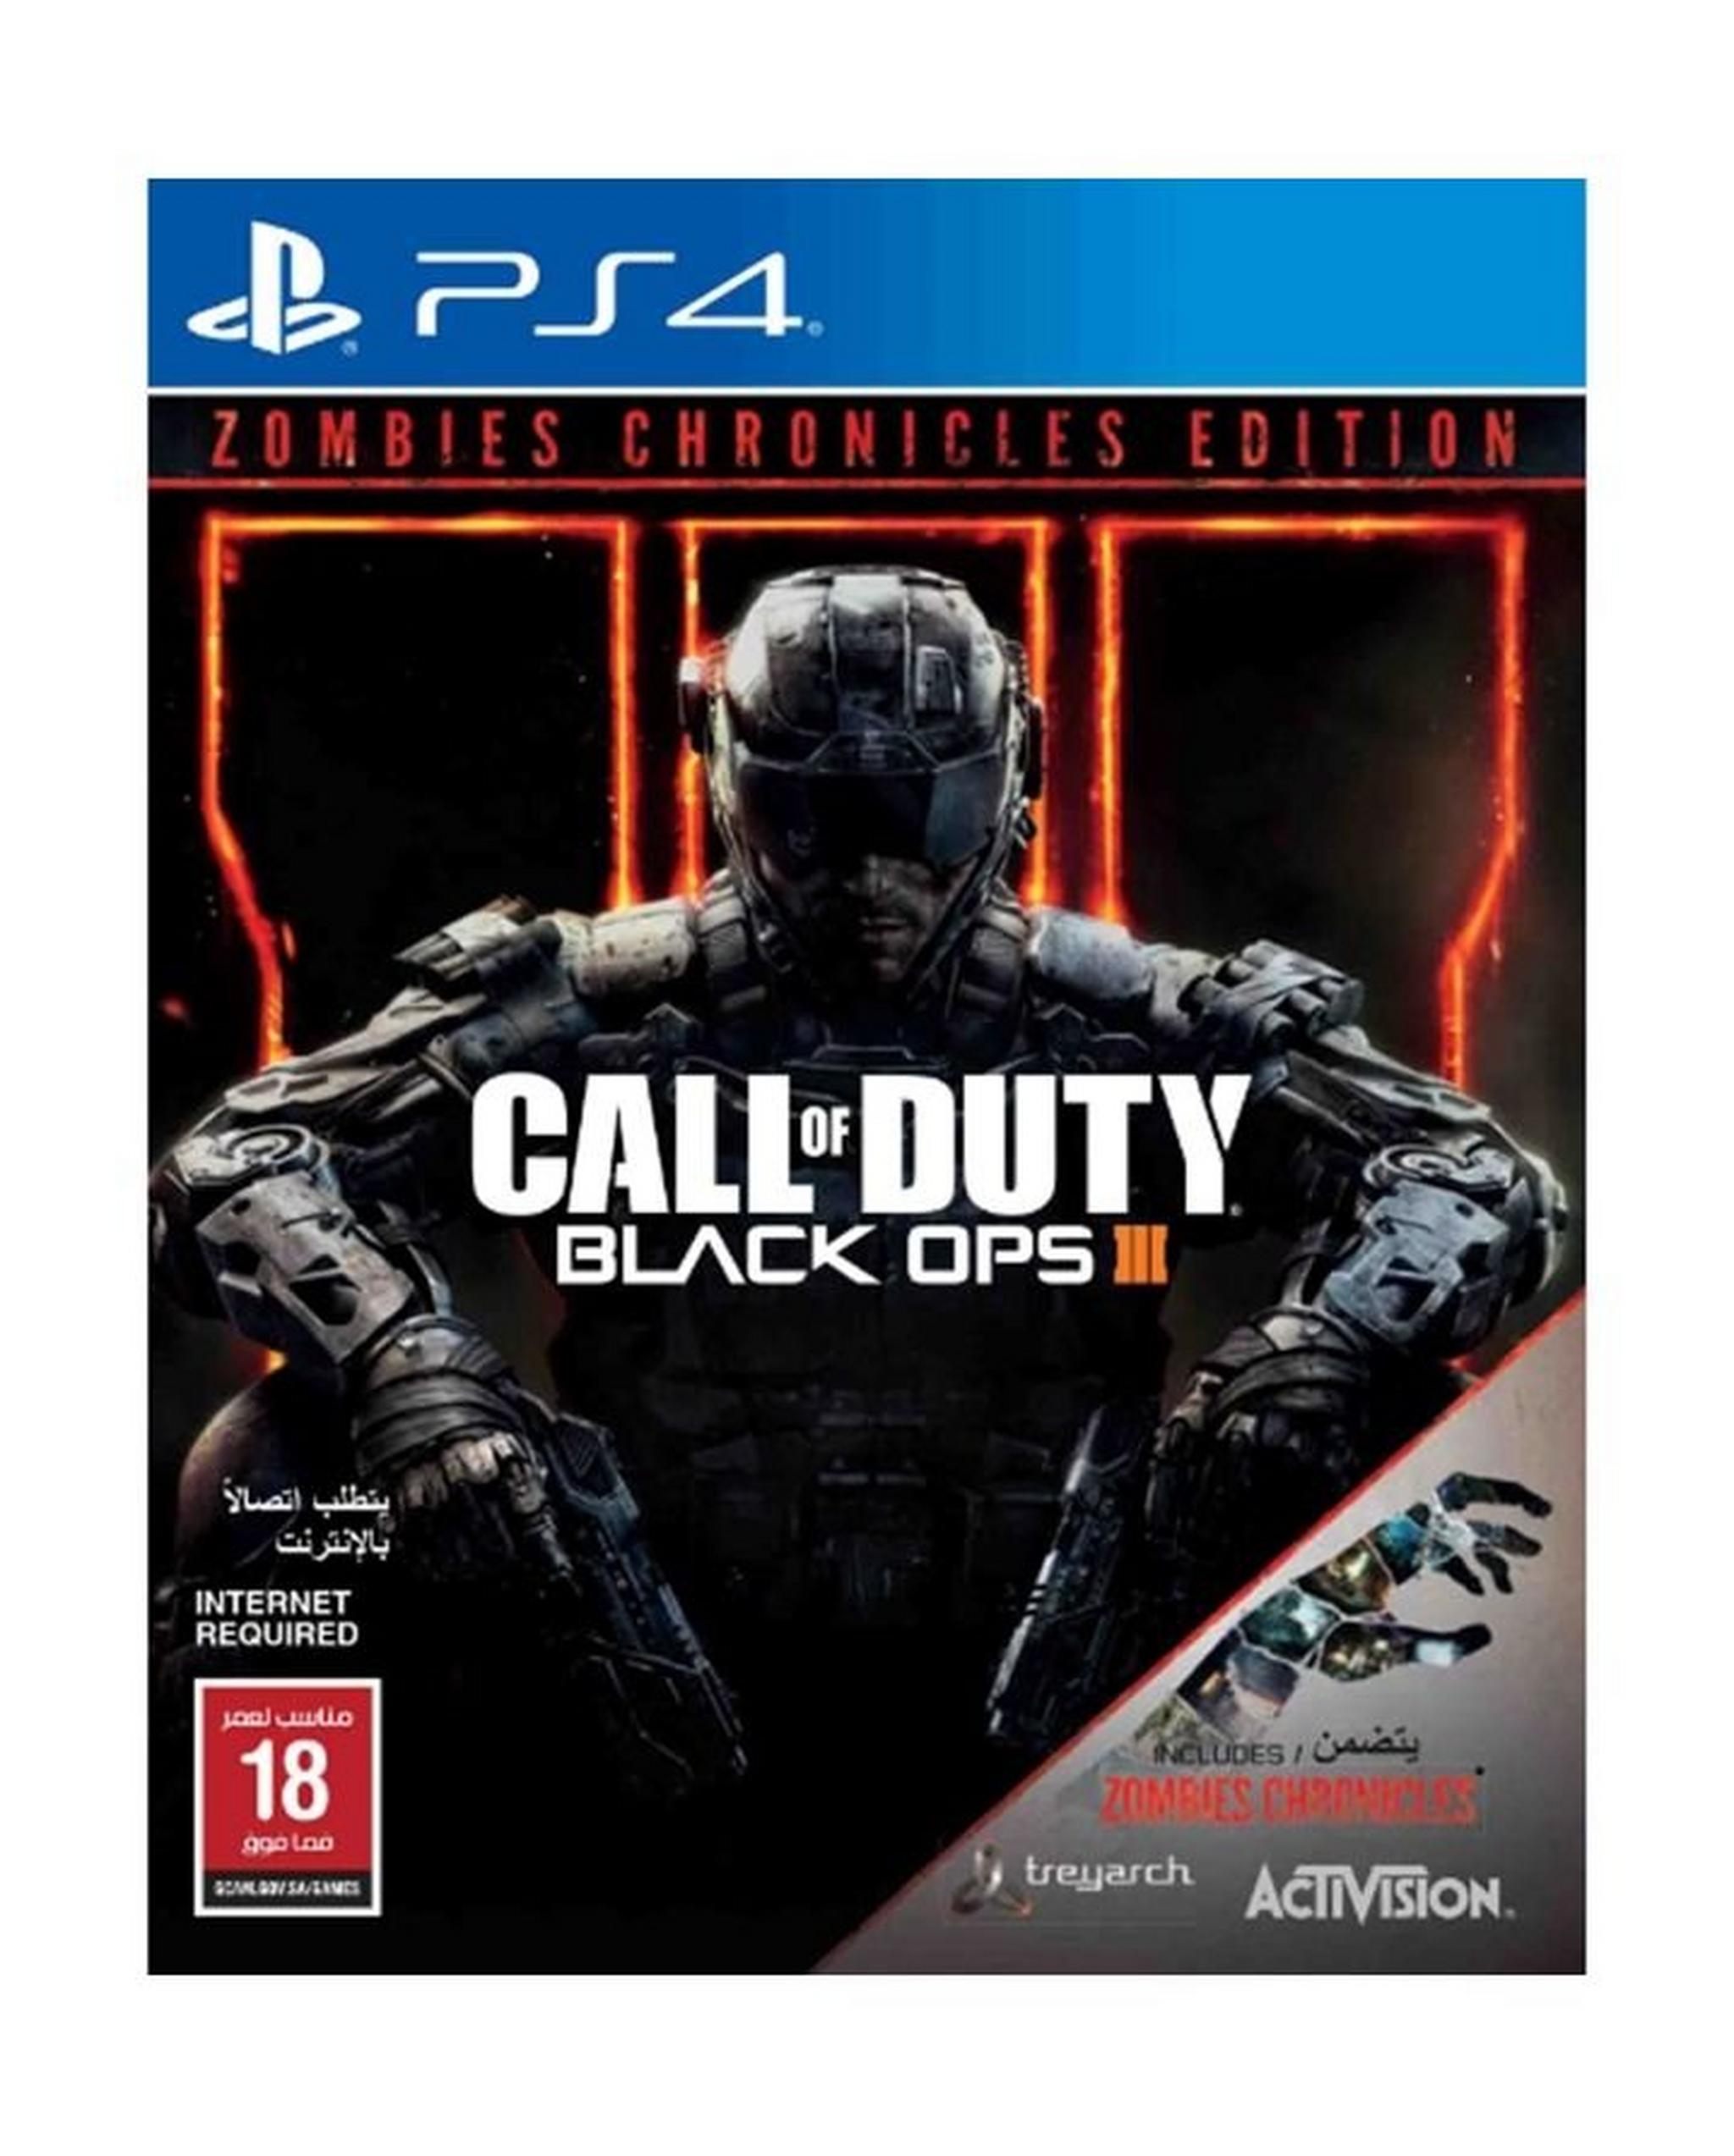 Call of Duty Black Ops III - Zombies Chronicles: PlayStation 4 Game